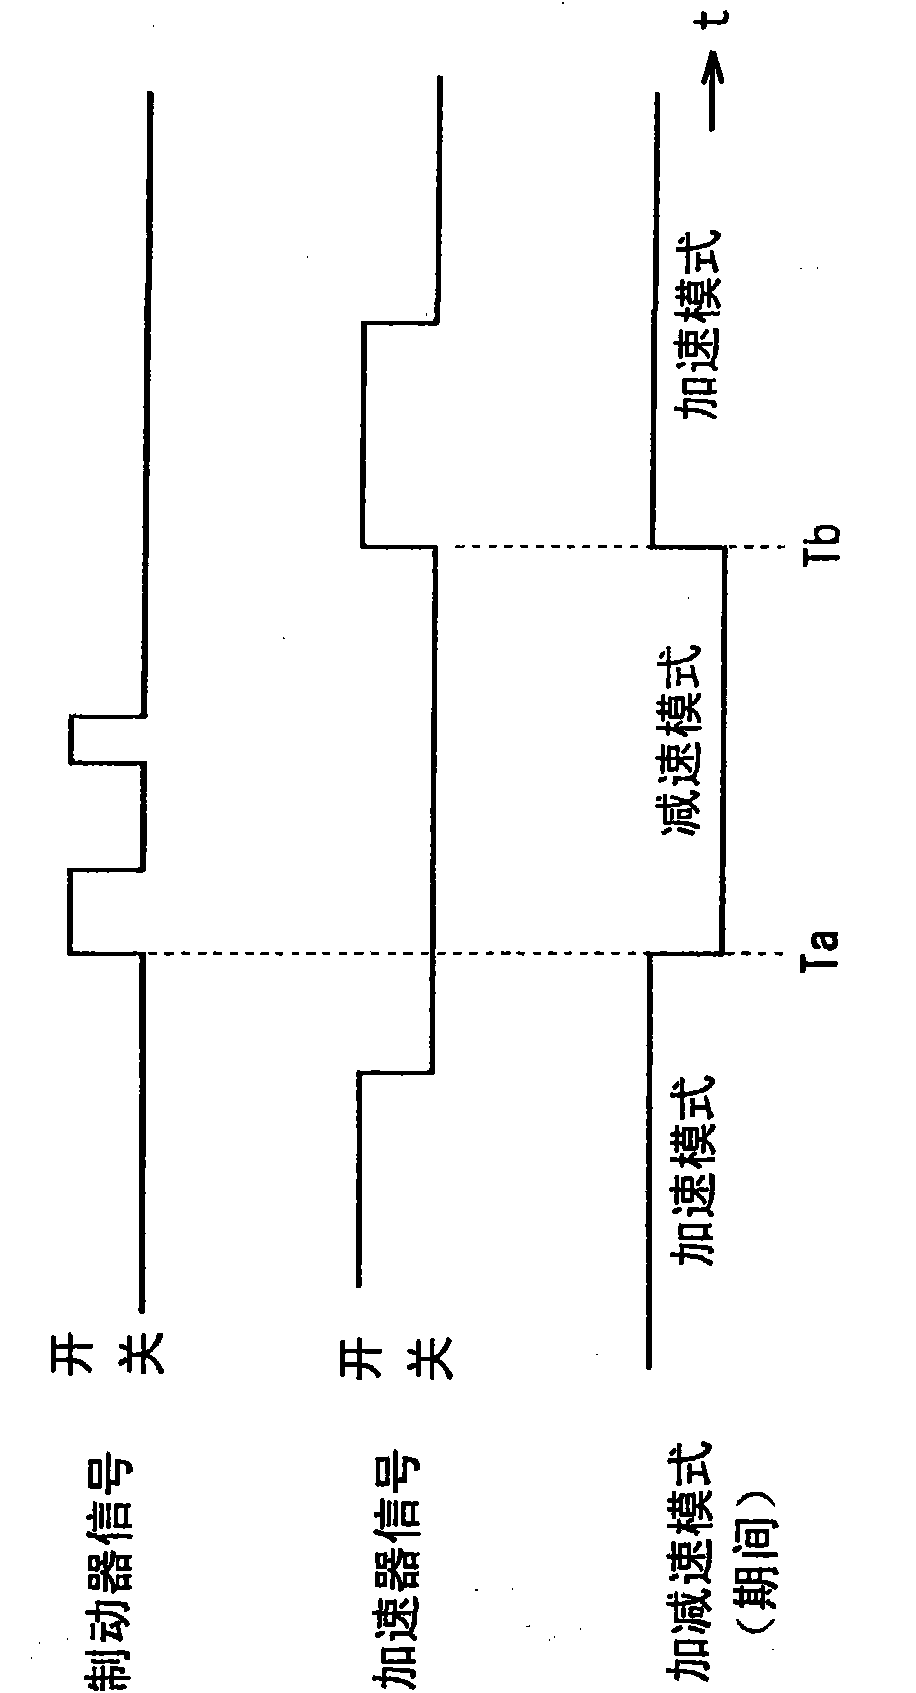 Gear shift controller for vehicle transmission